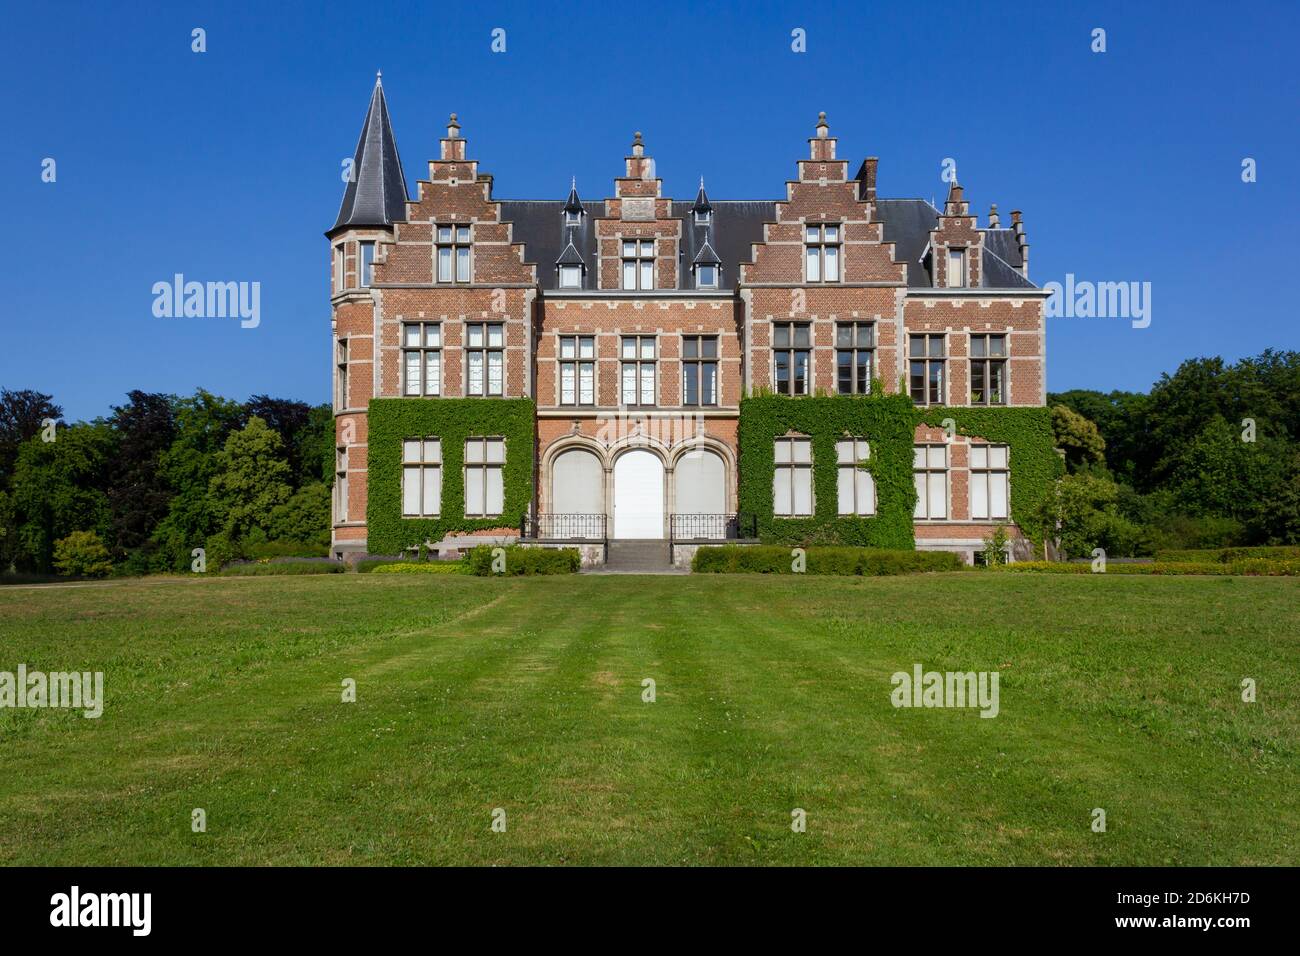 Front view of the 'Vrieselhof' castle during summer Stock Photo